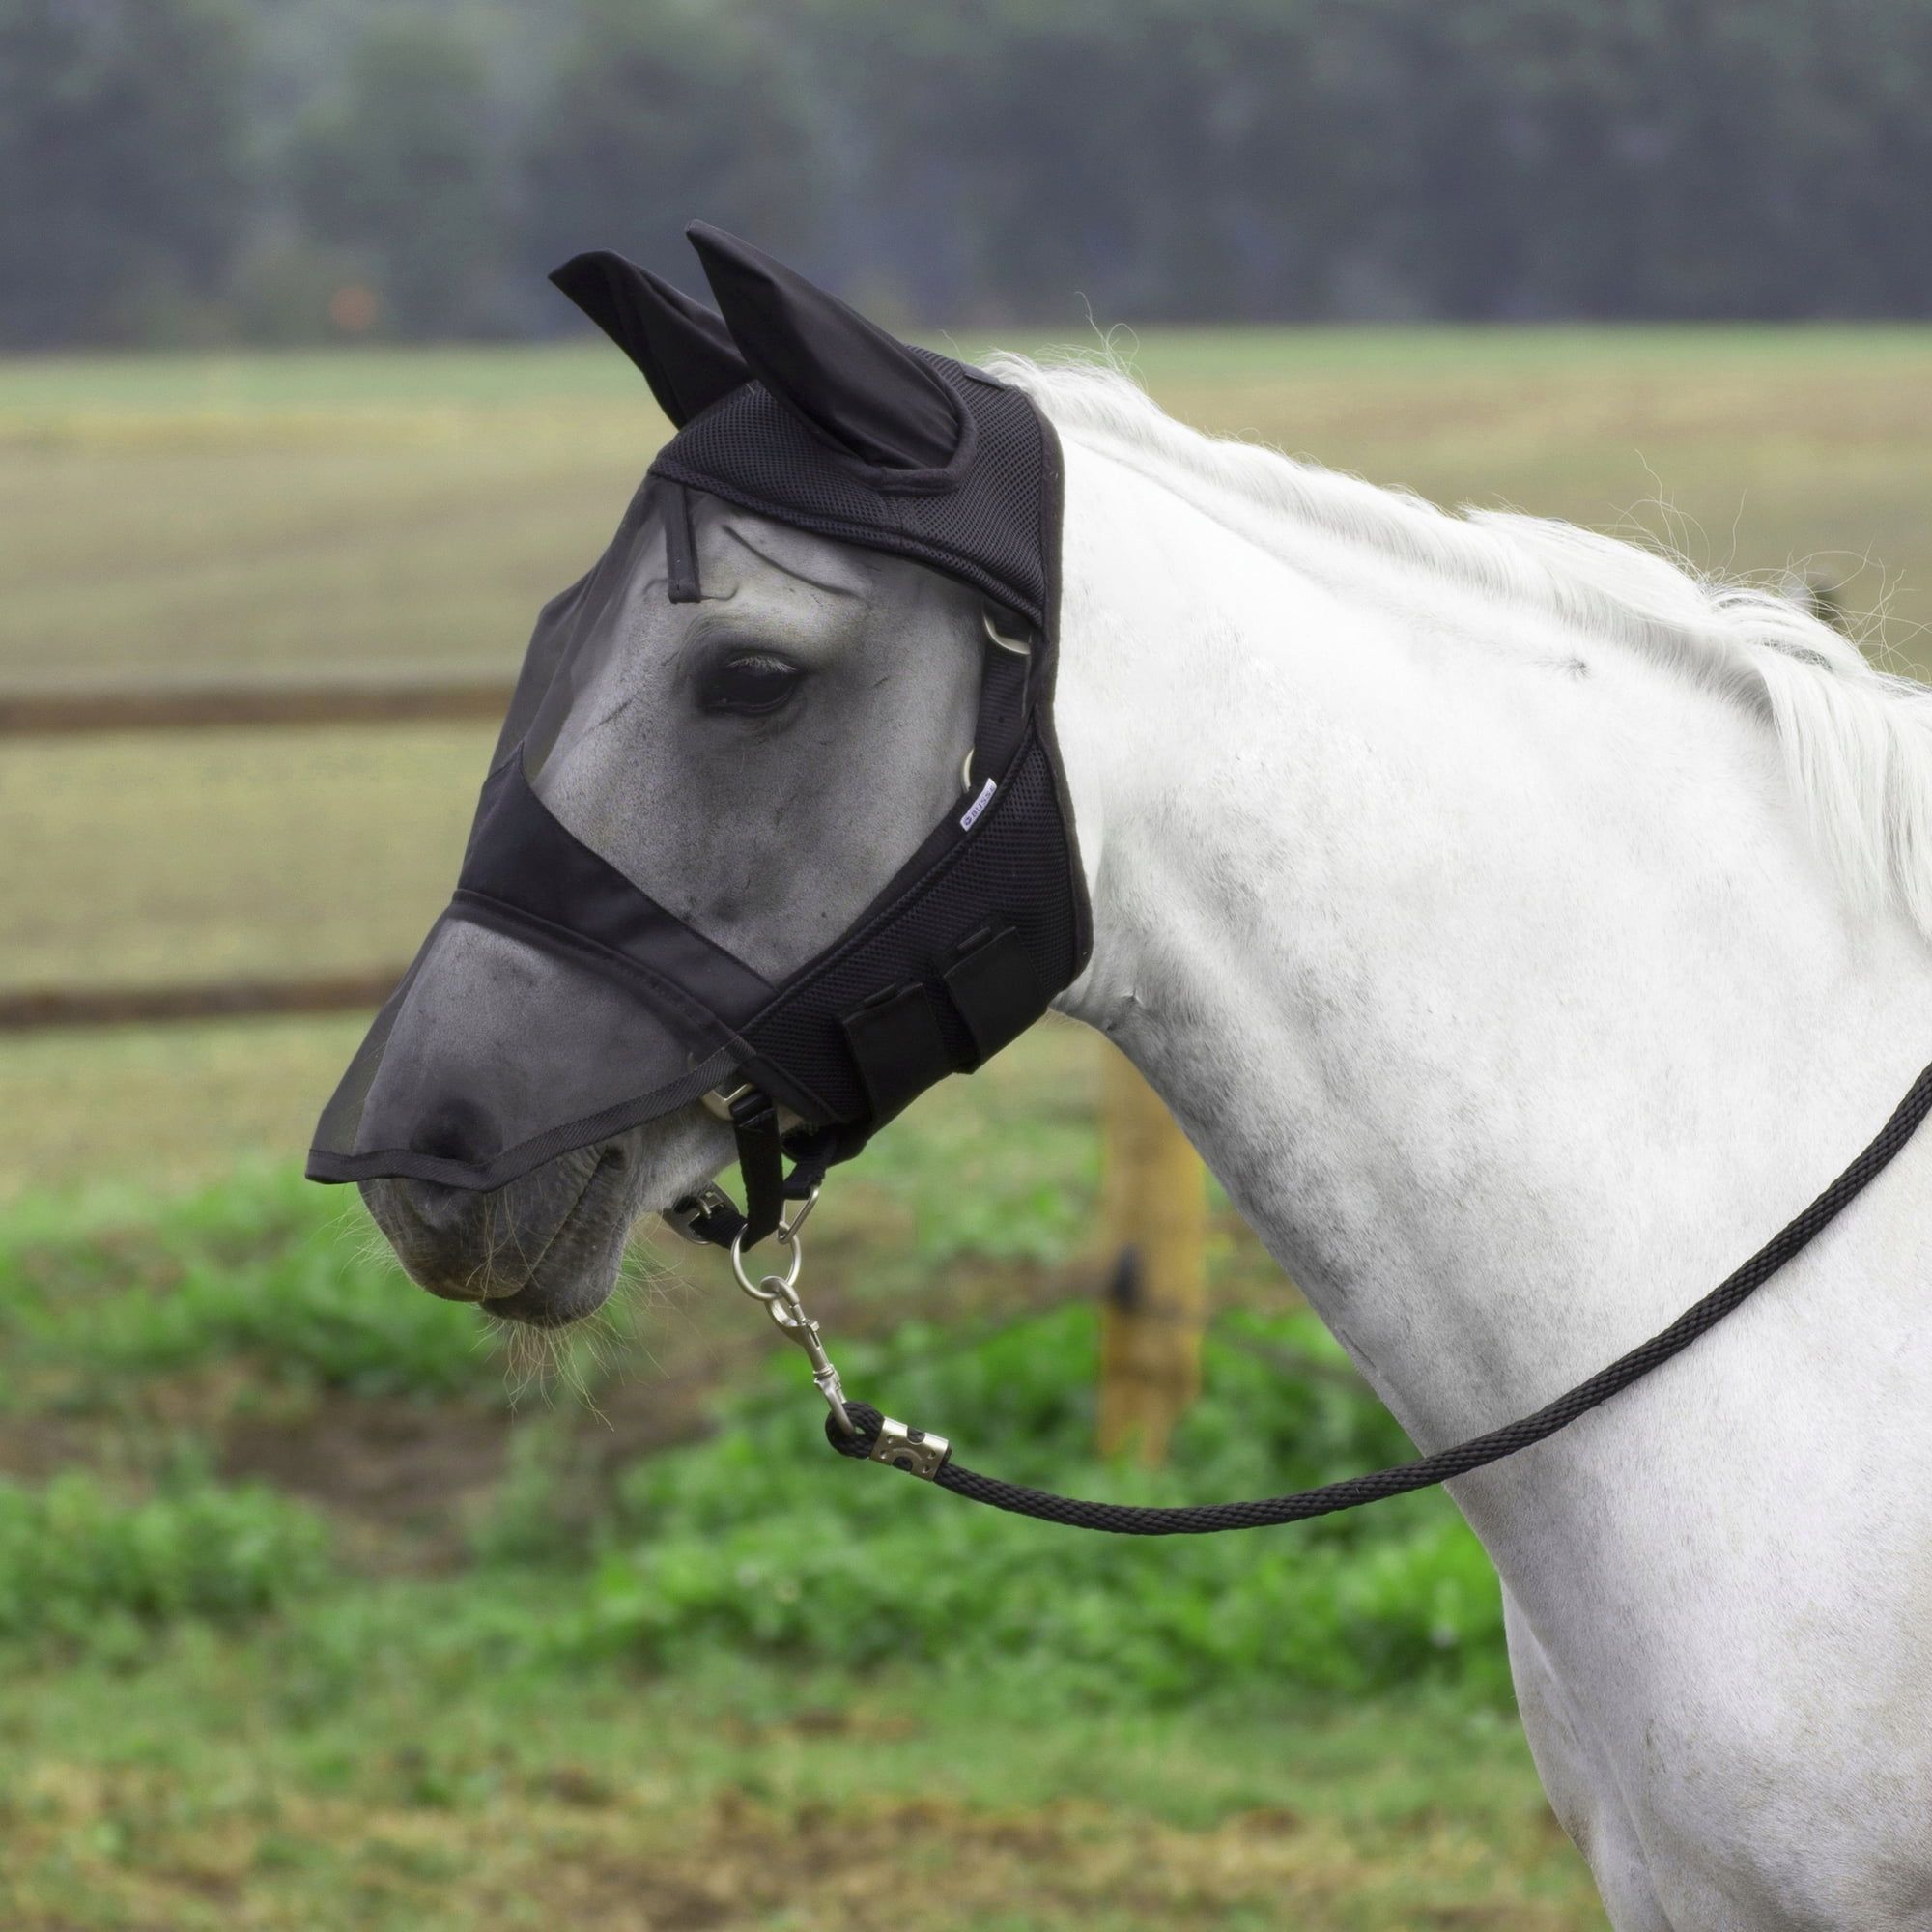 BUSSE FLY COVER PRO Fly Mask, Black - EquusVitalis Onlineshop